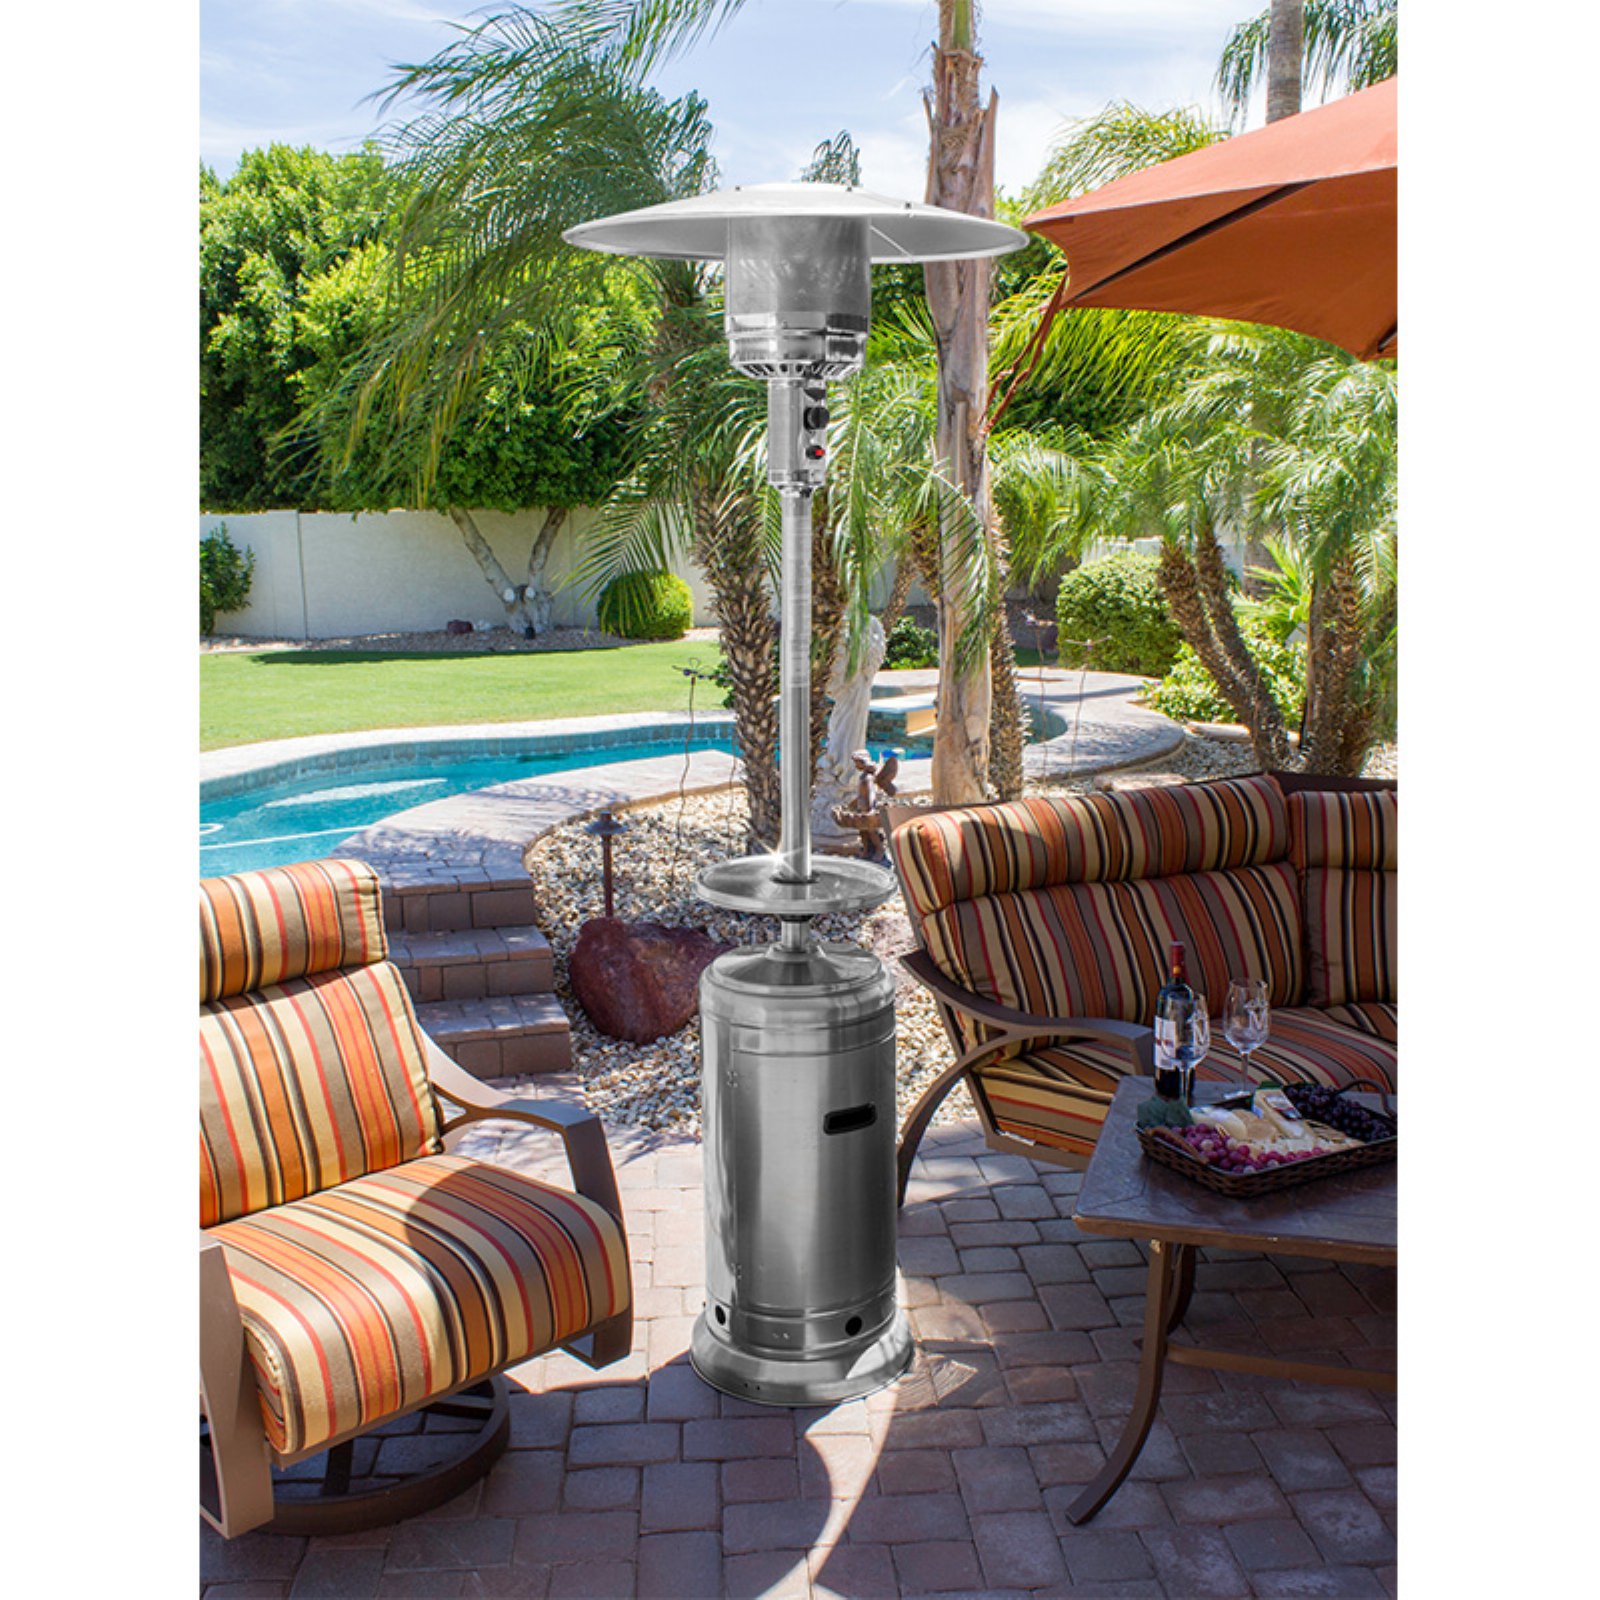 Hiland Patio Heater HLDS01-W-BS Propane 48000 BTU Stainless Steel - image 3 of 4